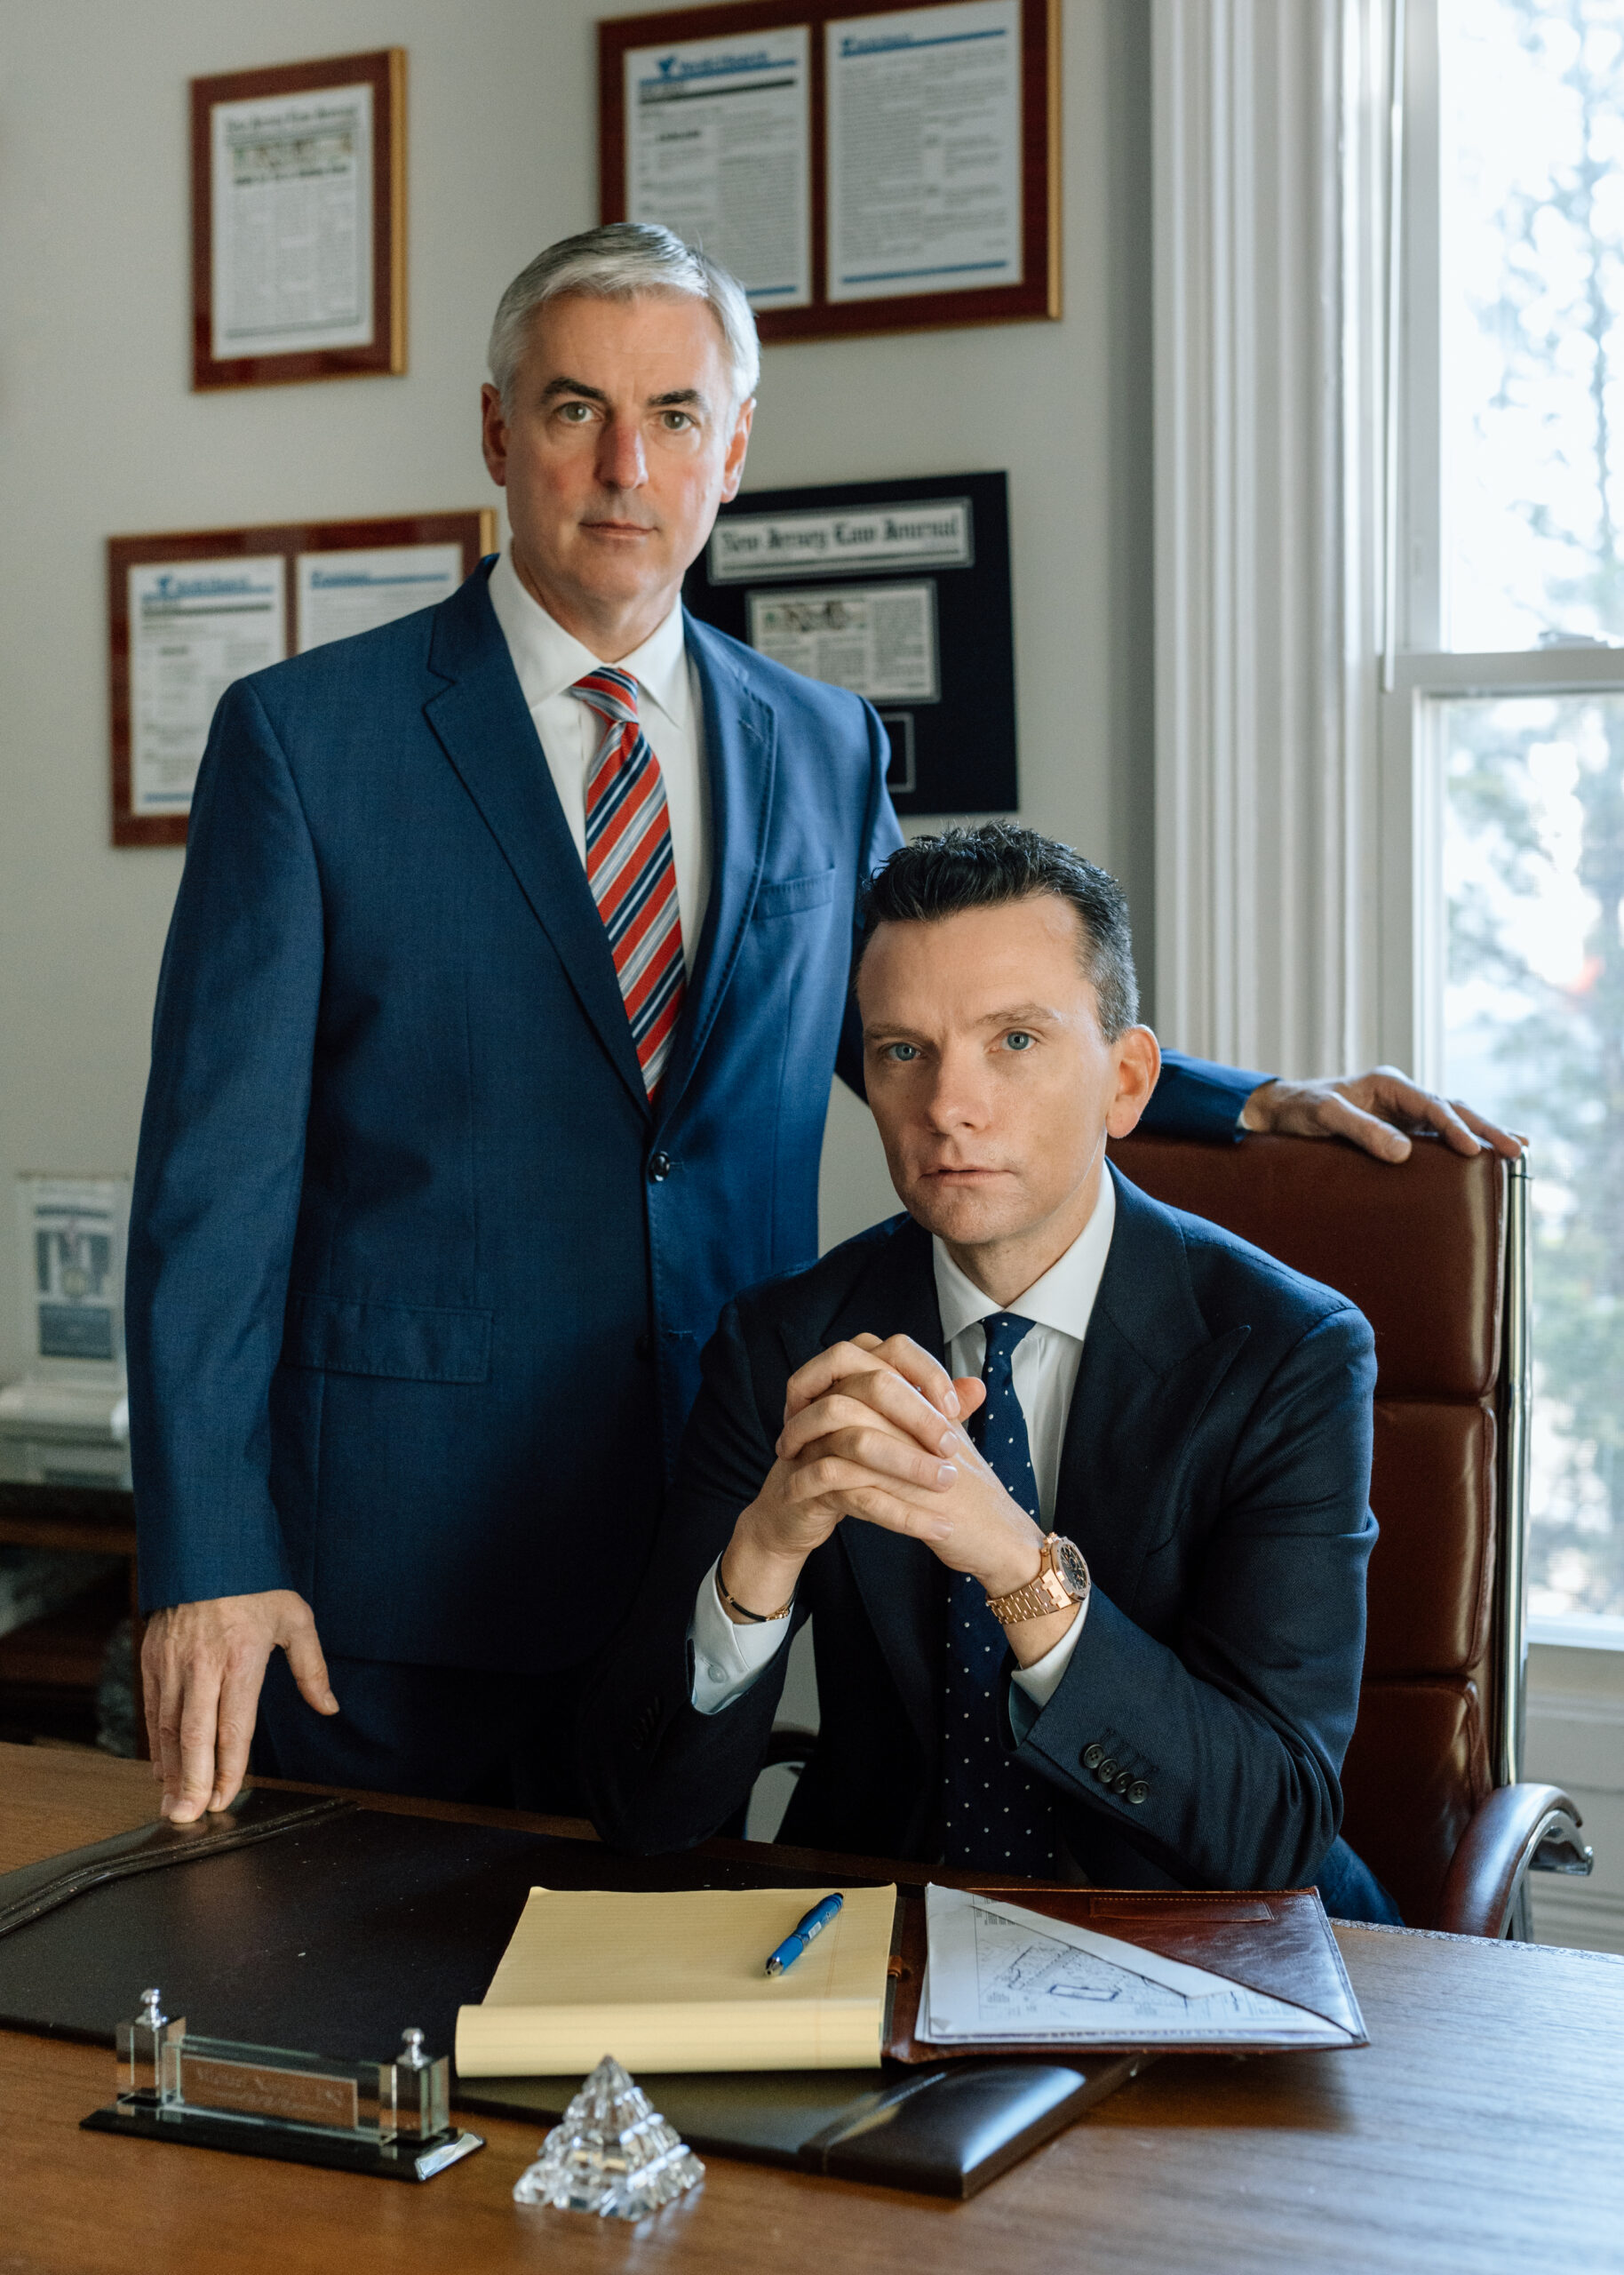 How Can Clark & Noonan, LLC Help Me With My Monmouth County Personal Injury Case?